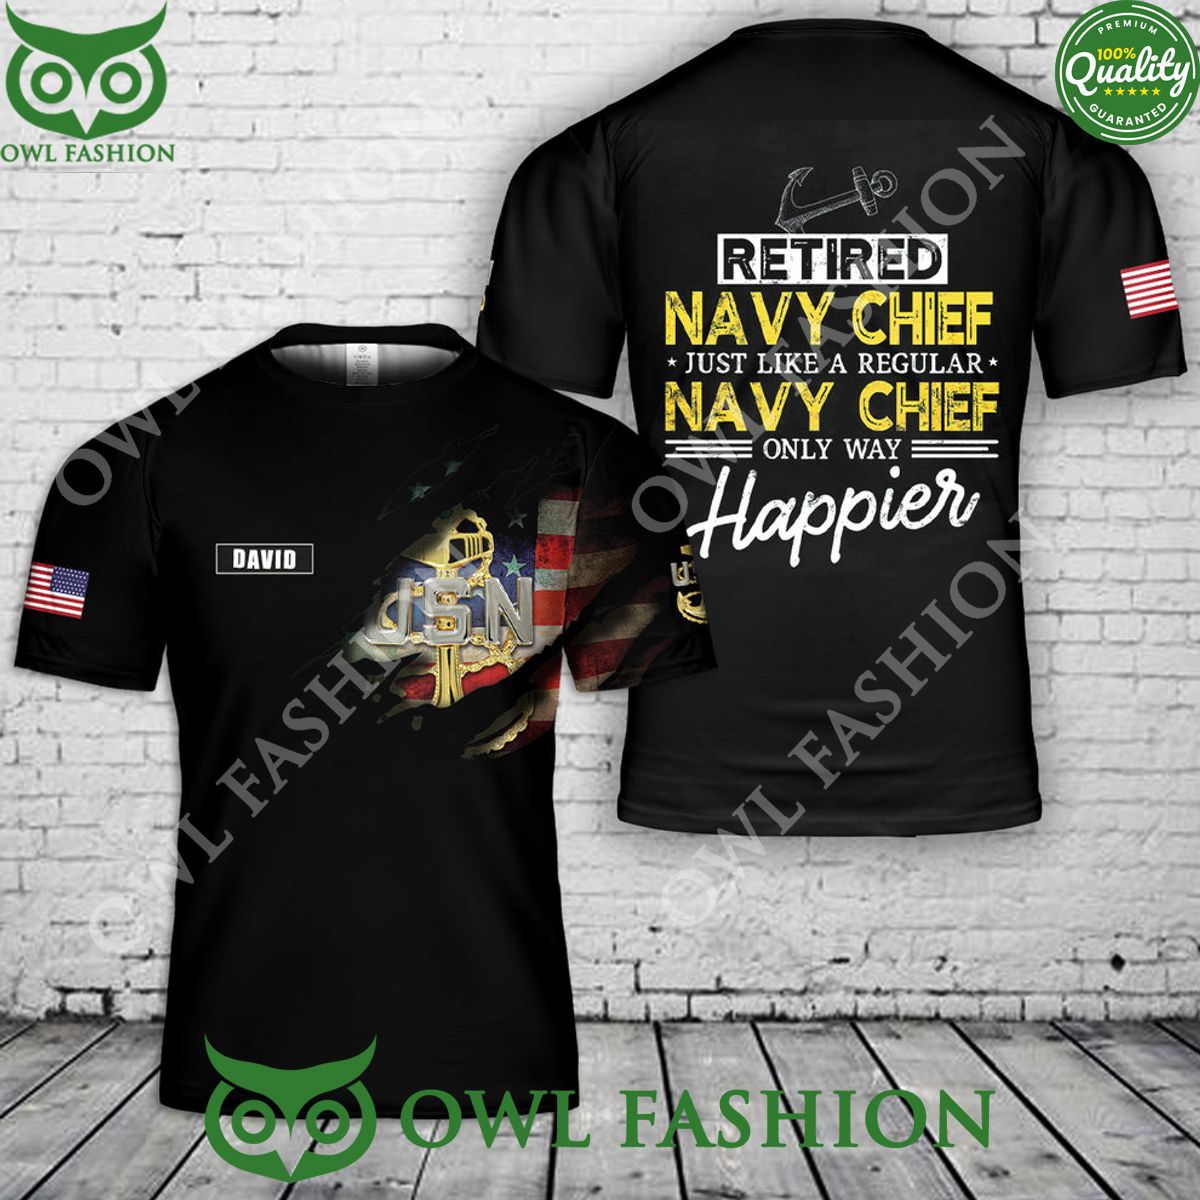 custom name us navy chief retired just like a regular navy chief only way happier 3d t shirt 1 DNZ20.jpg